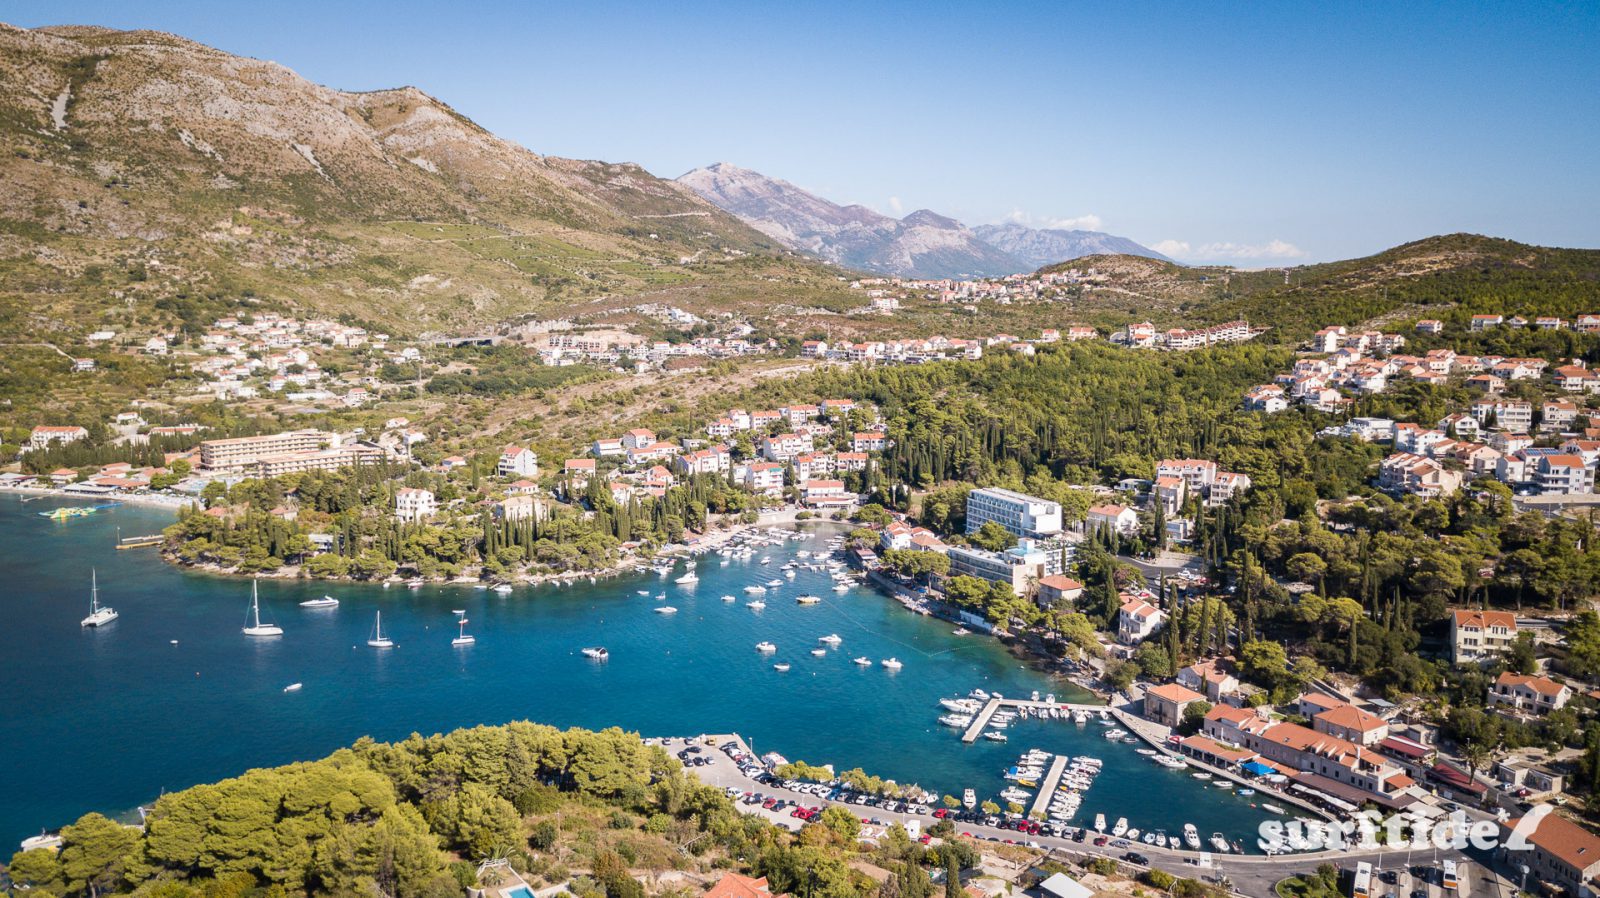 Aerial photo of the small coastal town of Cavtat and surrounding mountains in southern Croatia